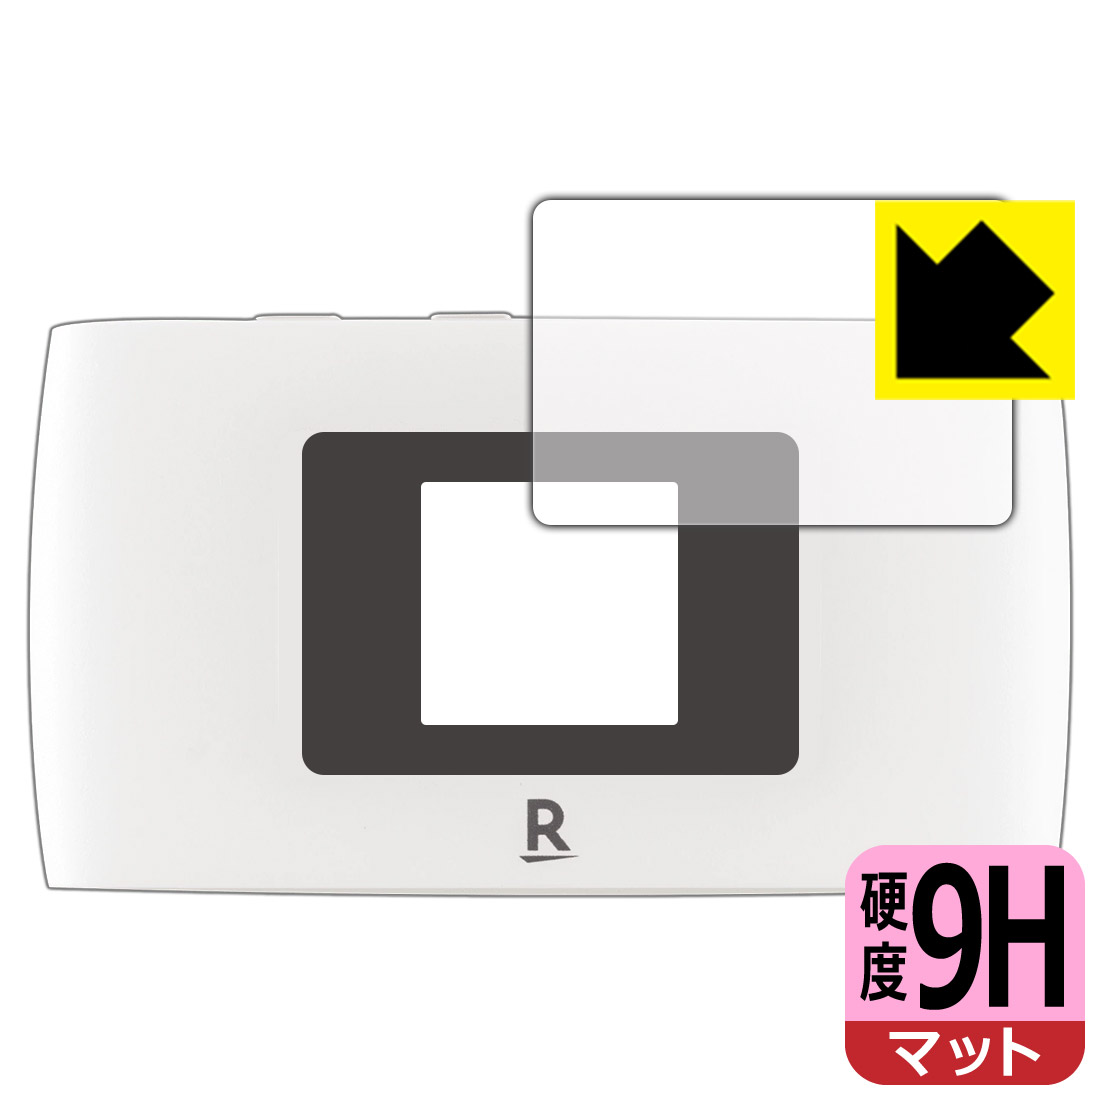 9H高硬度【反射低減】保護フィルム <strong>Rakuten</strong> <strong>WiFi</strong> <strong>Pocket</strong> 2B / <strong>2C</strong> (液晶用) 日本製 自社製造直販